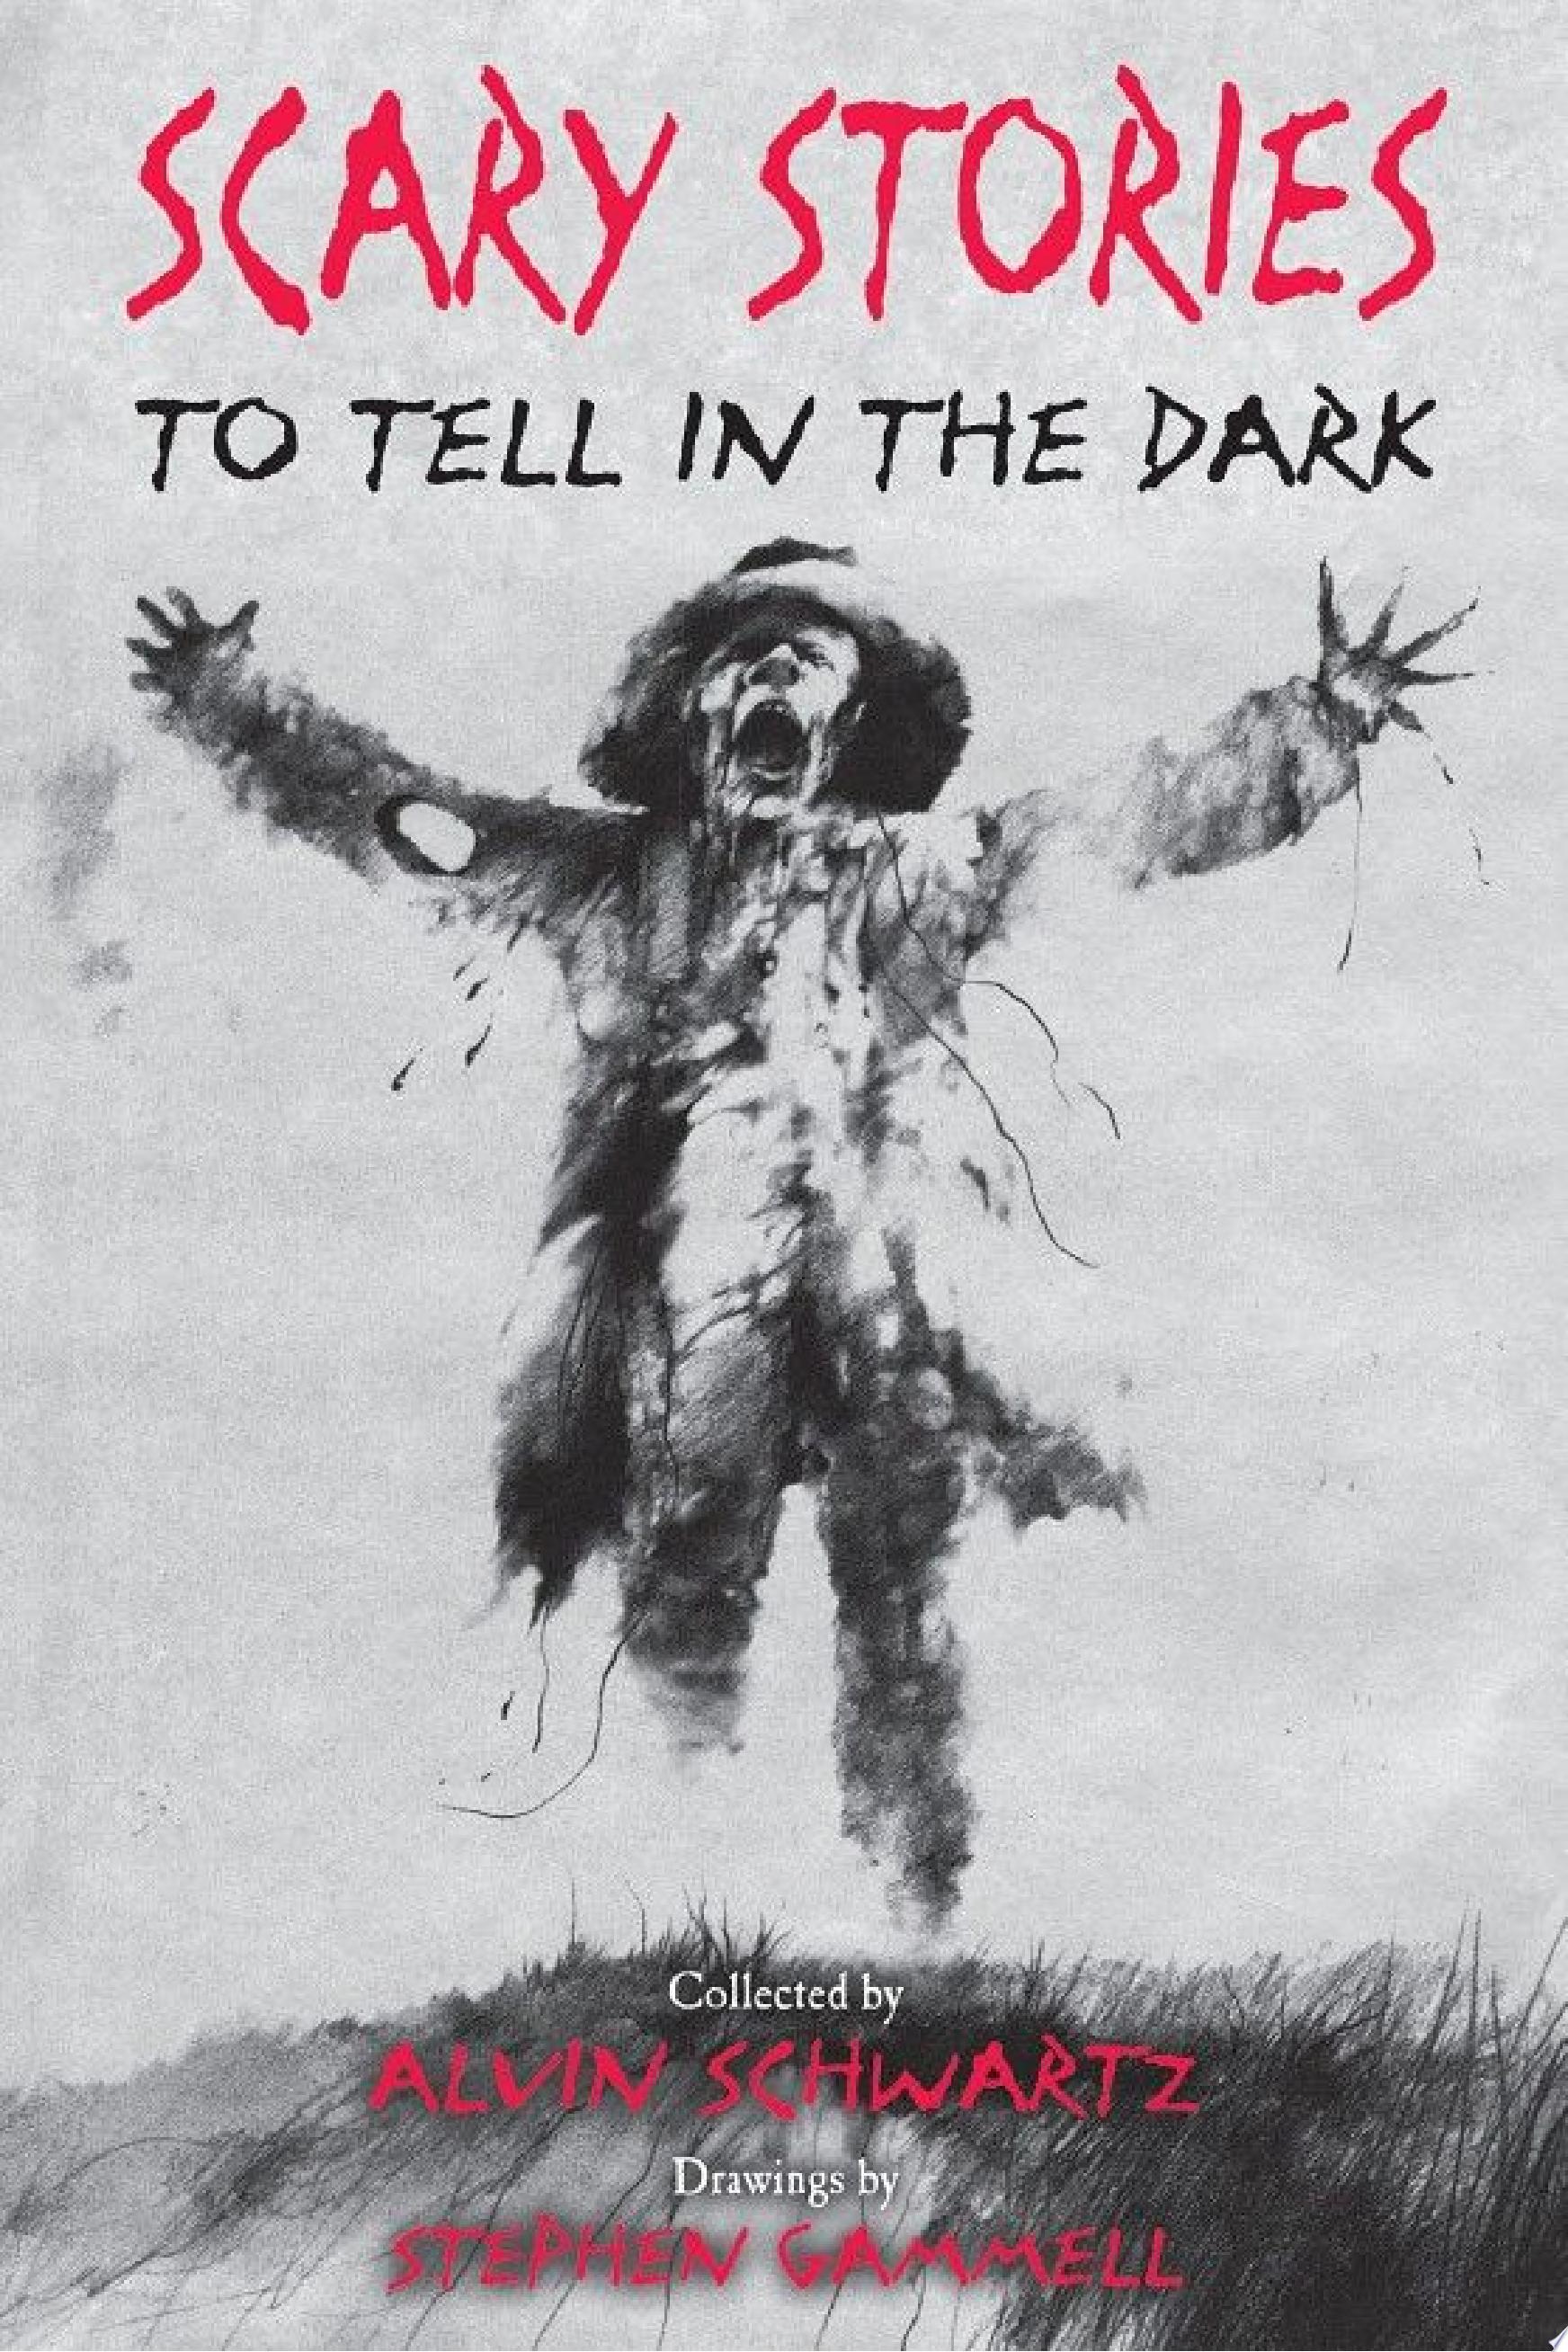 Scary stories in the dark. Scary stories to tell in the Dark книга.